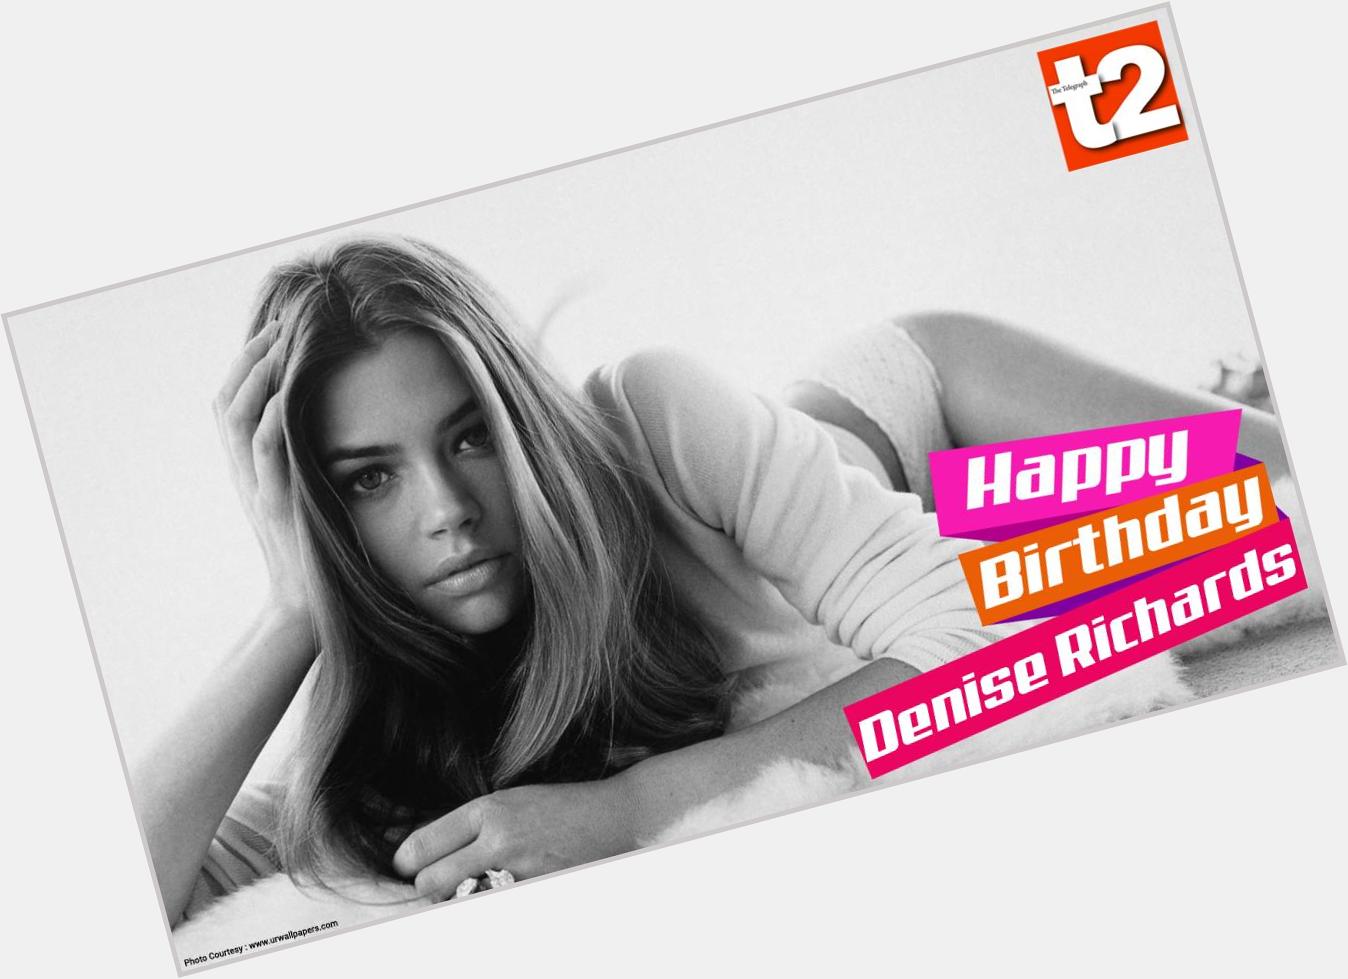 Join us in wishing the \Drop Dead Gorgeous\ a Happy Birthday! 